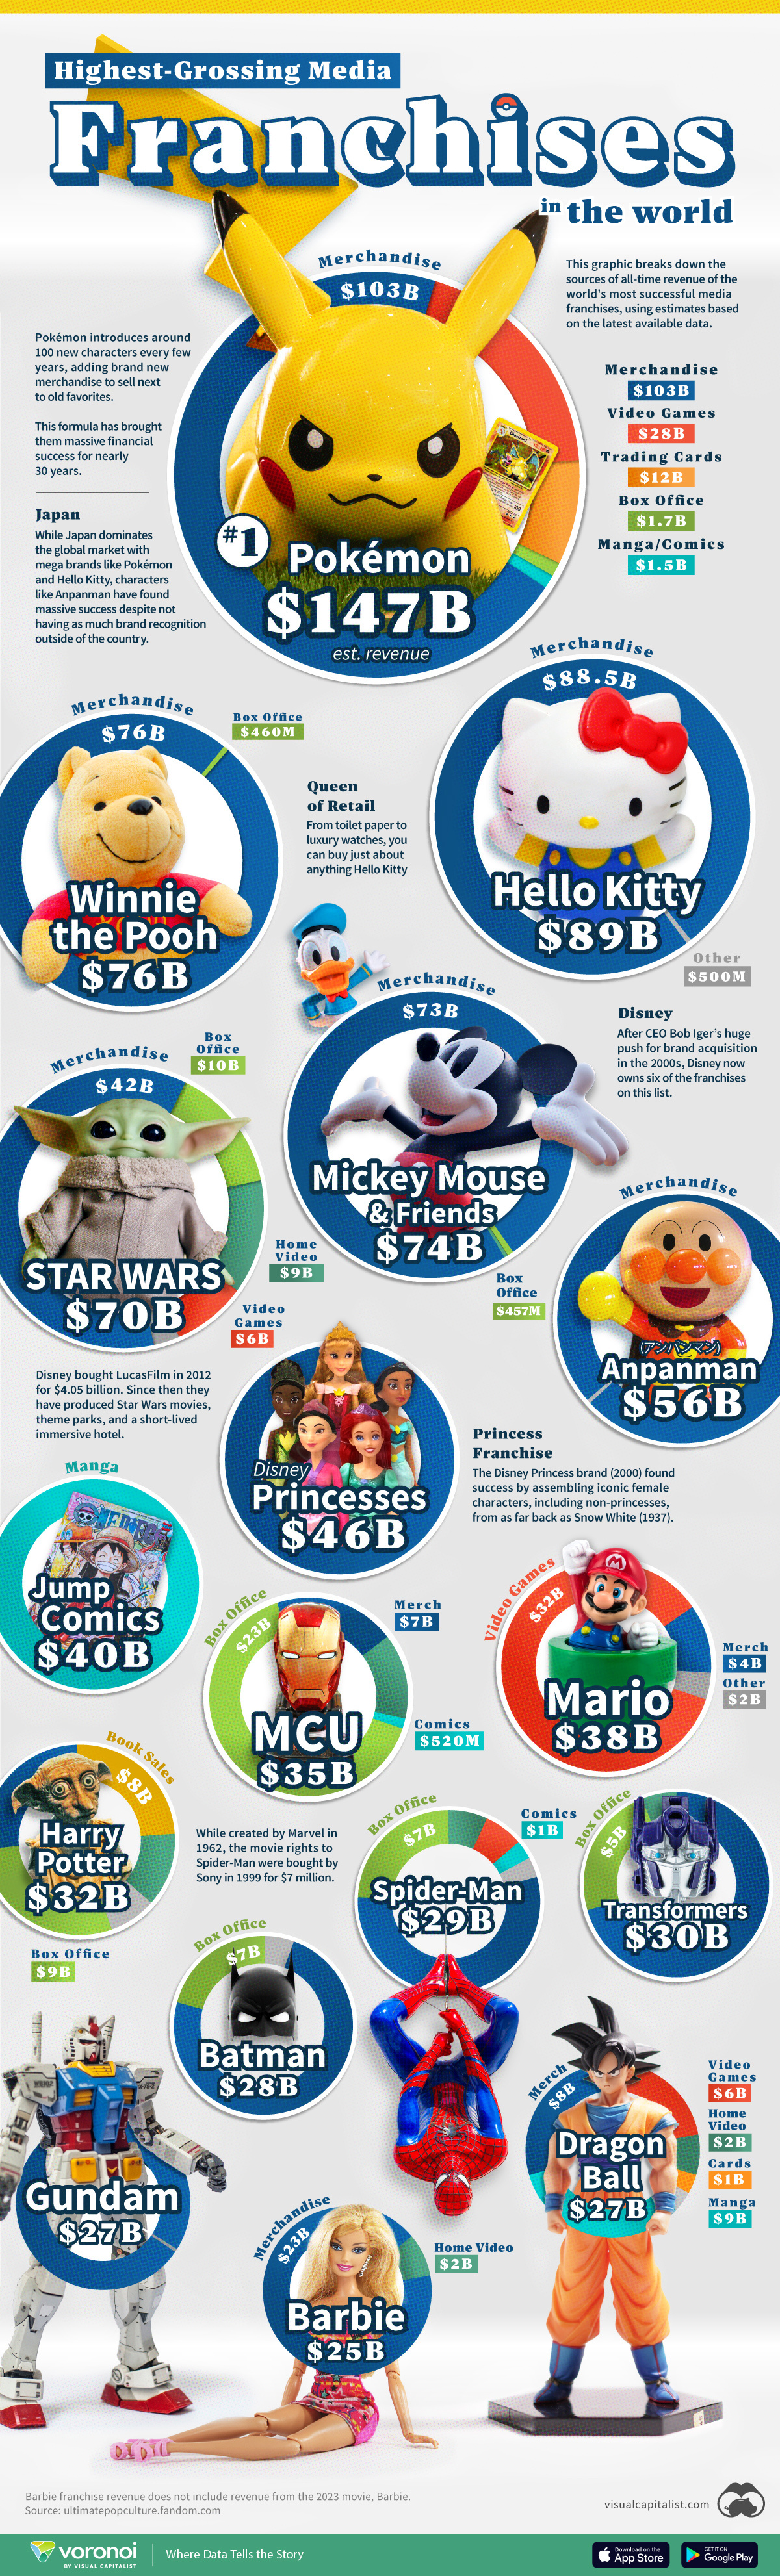 infographic of biggest global media franchises by their all-time revenue